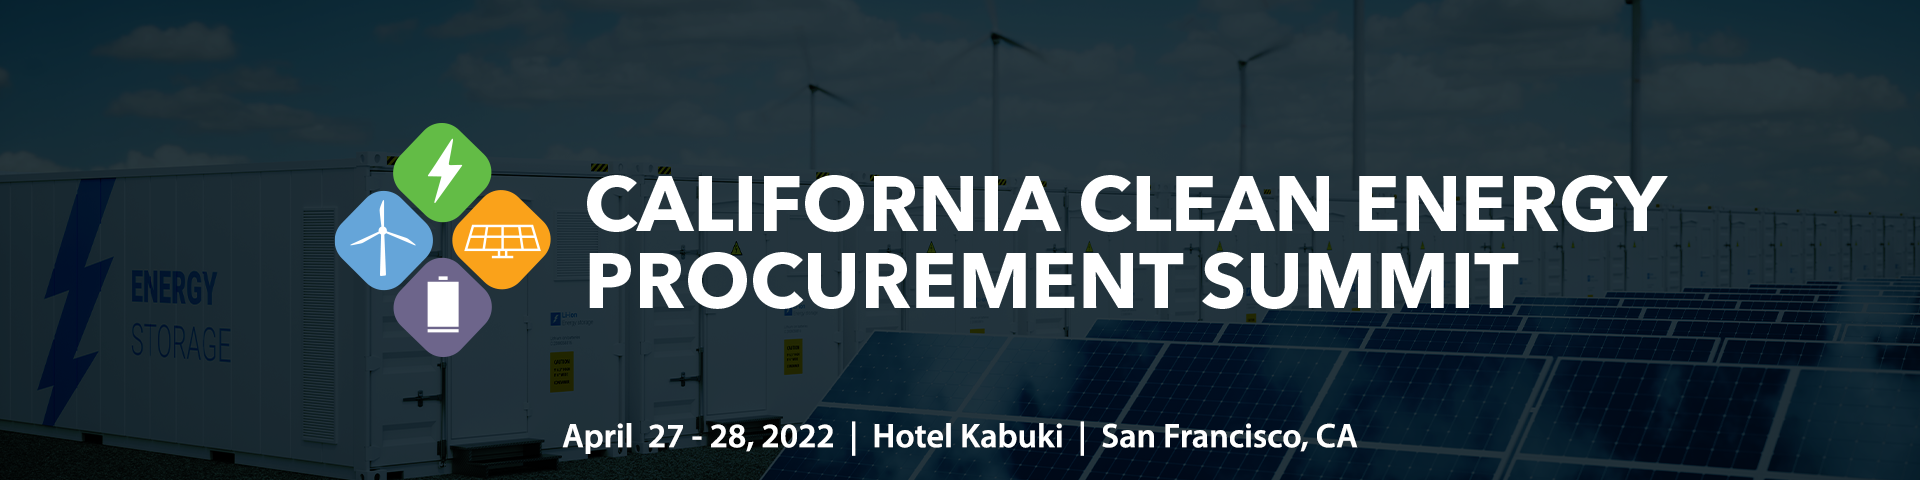 A banner with the words california clean procurement week on it.